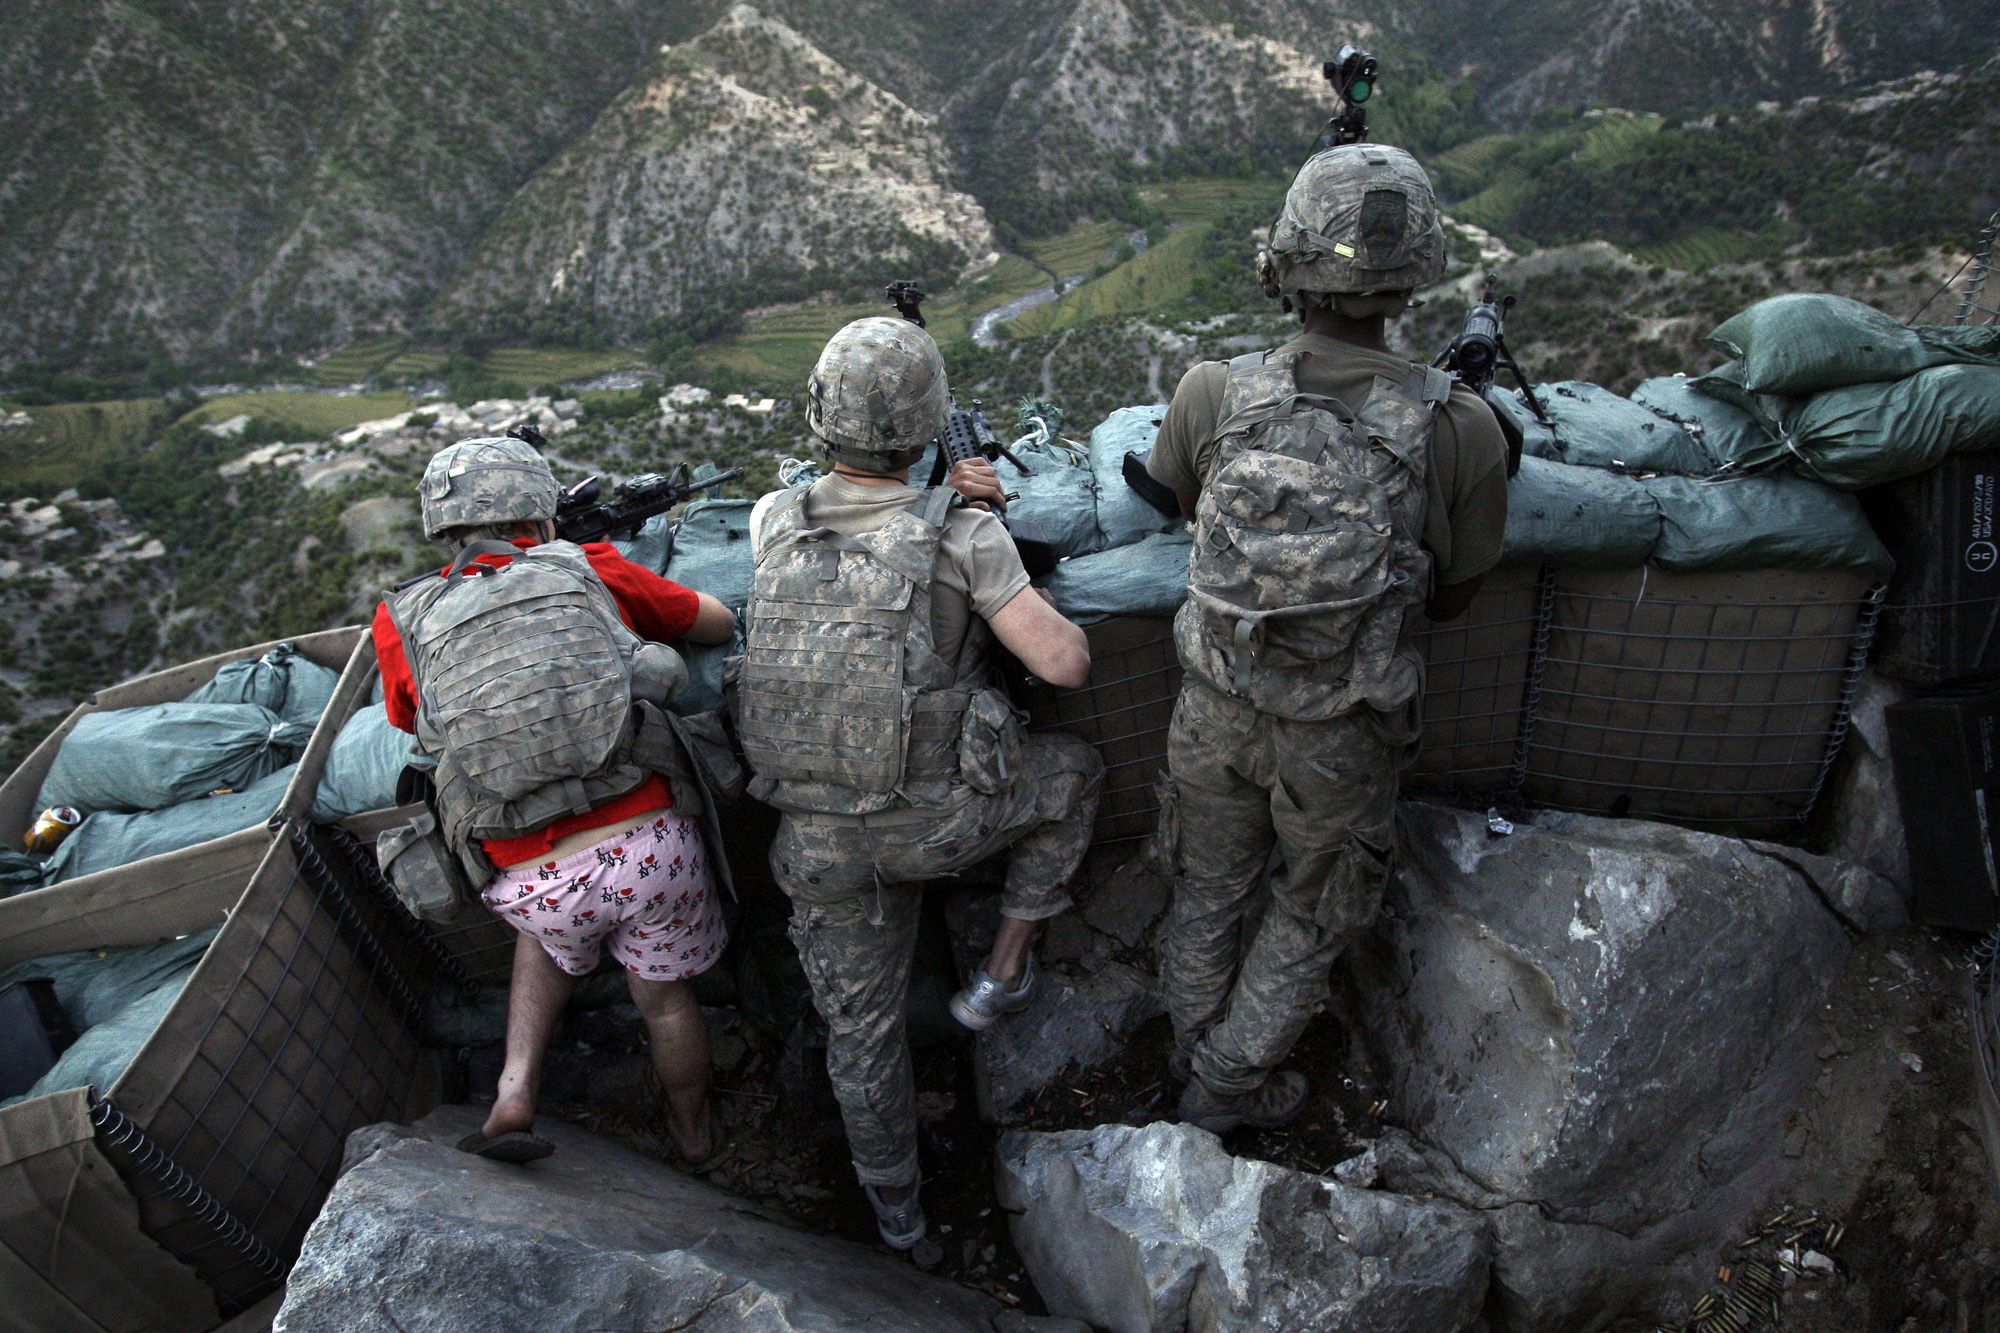 Soldiers from the U.S. Army First Battalion, 26th Infantry take defensive positions at firebase Restrepo after receiving fire from Taliban positions in the Korengal Valley of Afghanistan's Kunar Province on May 11, 2009. Photo was awarded 2nd prize in the  People in the News Singles category in the 2010 World Press Photo contest.